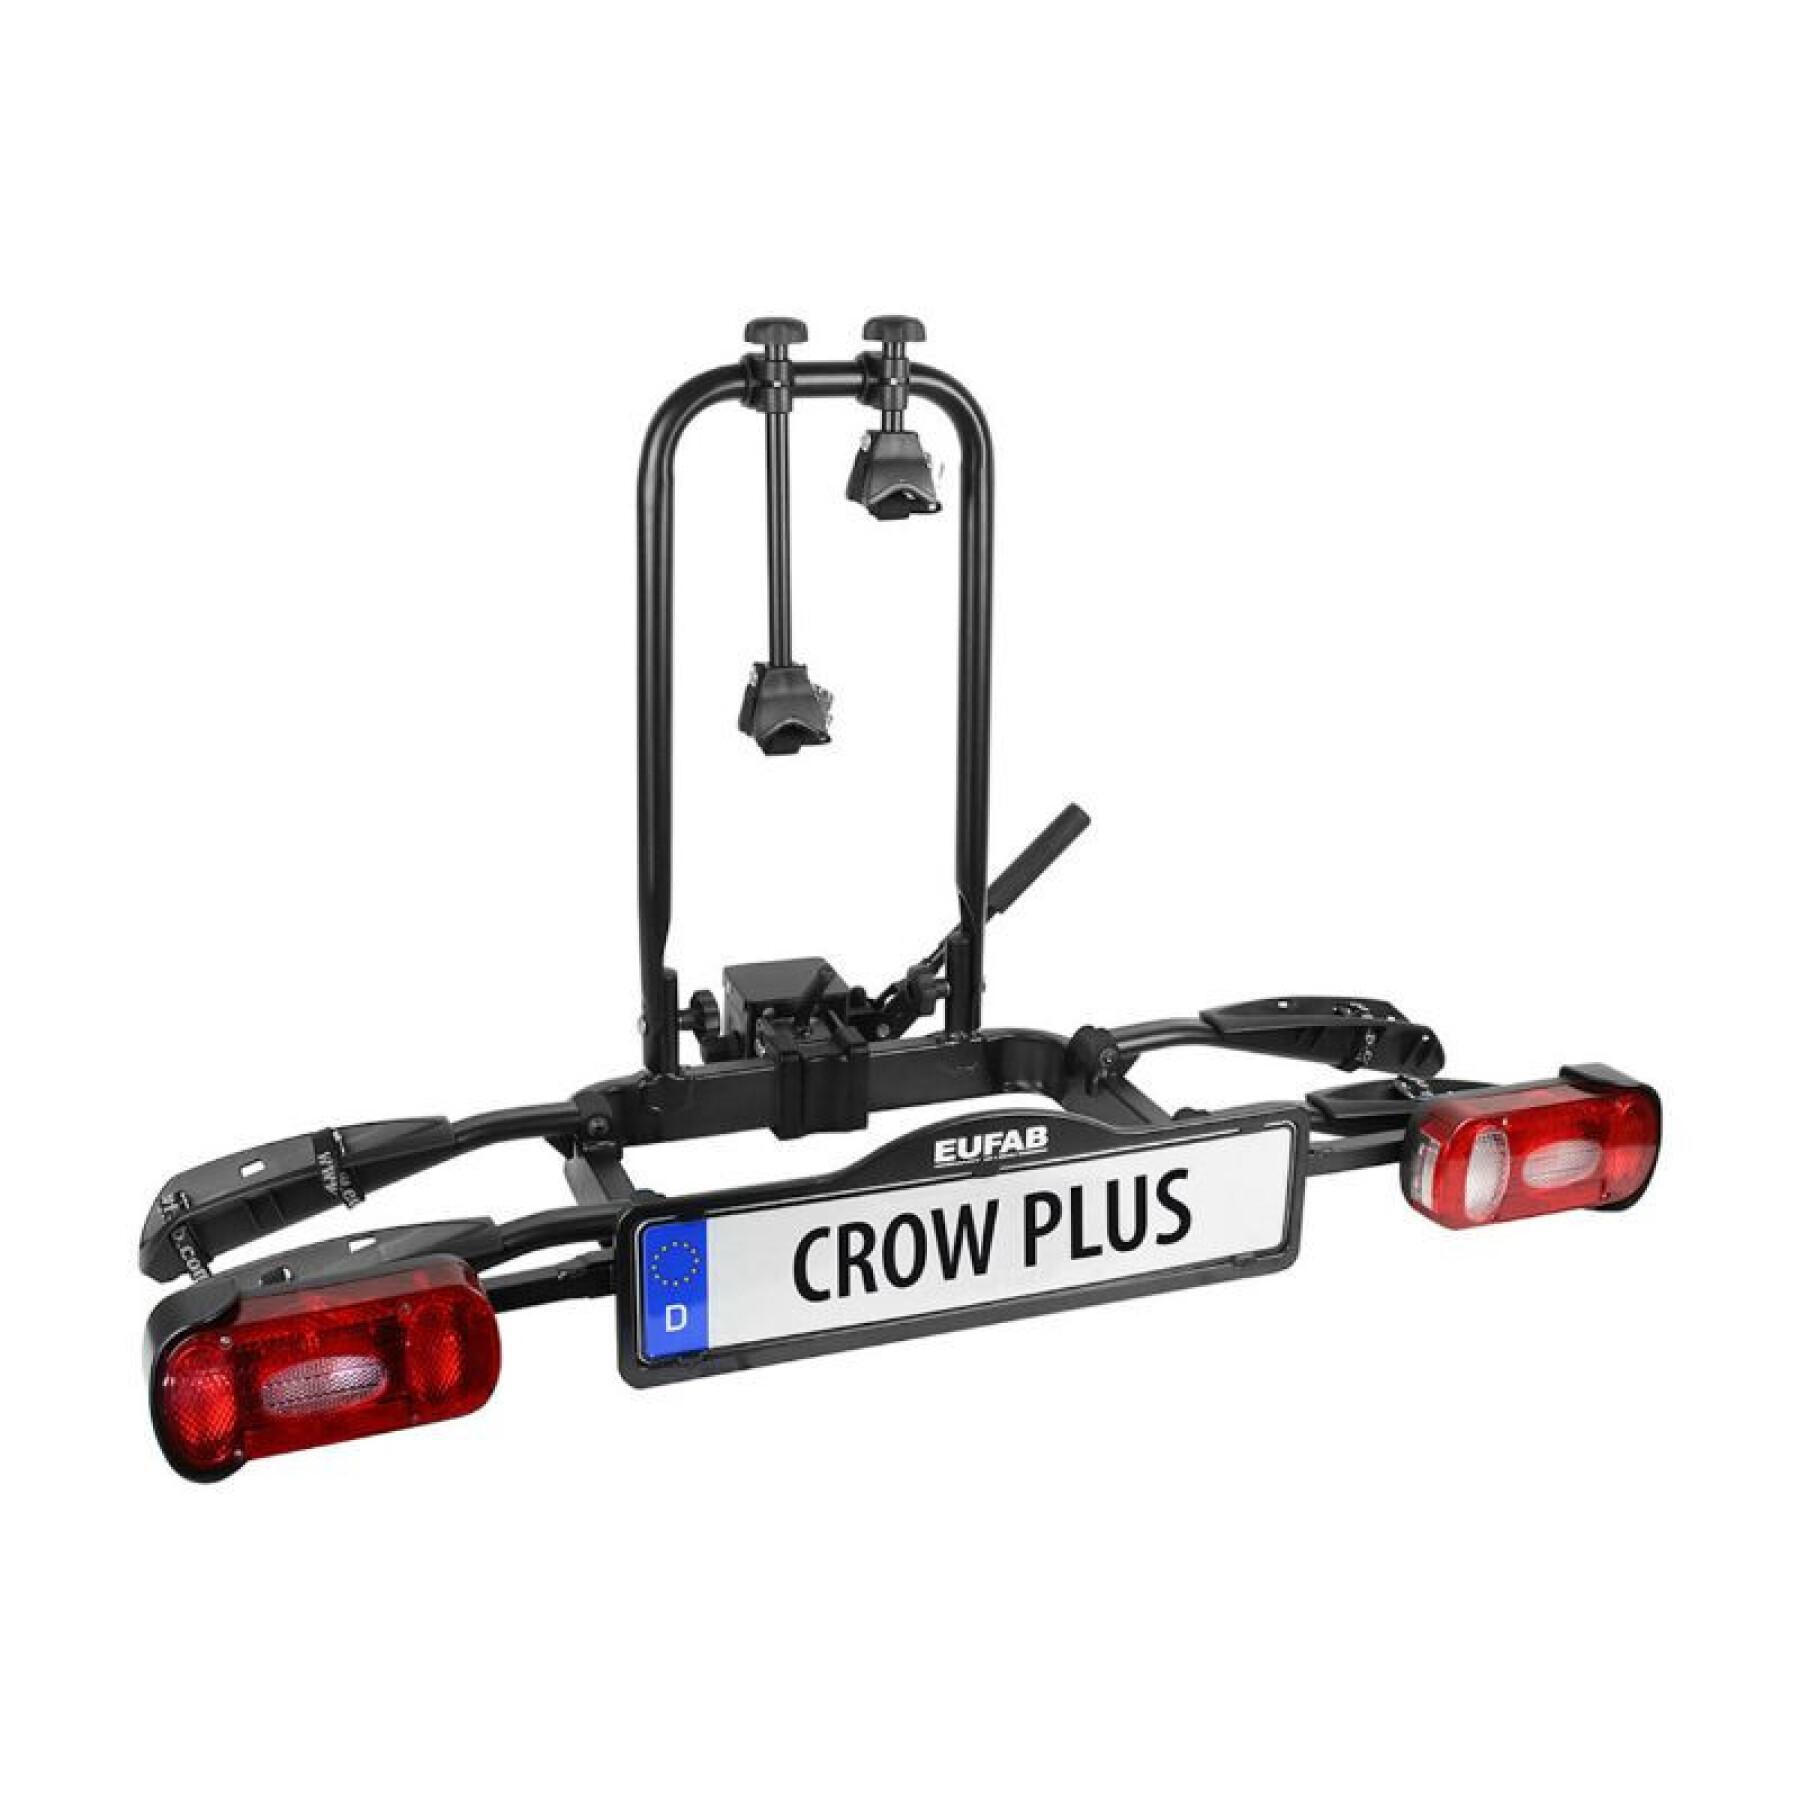 Bicycle carrier plateform plus for 2 bikes - rapide on the hitch - possibility of an extension for velo - max load 50kgs Eufab Crow